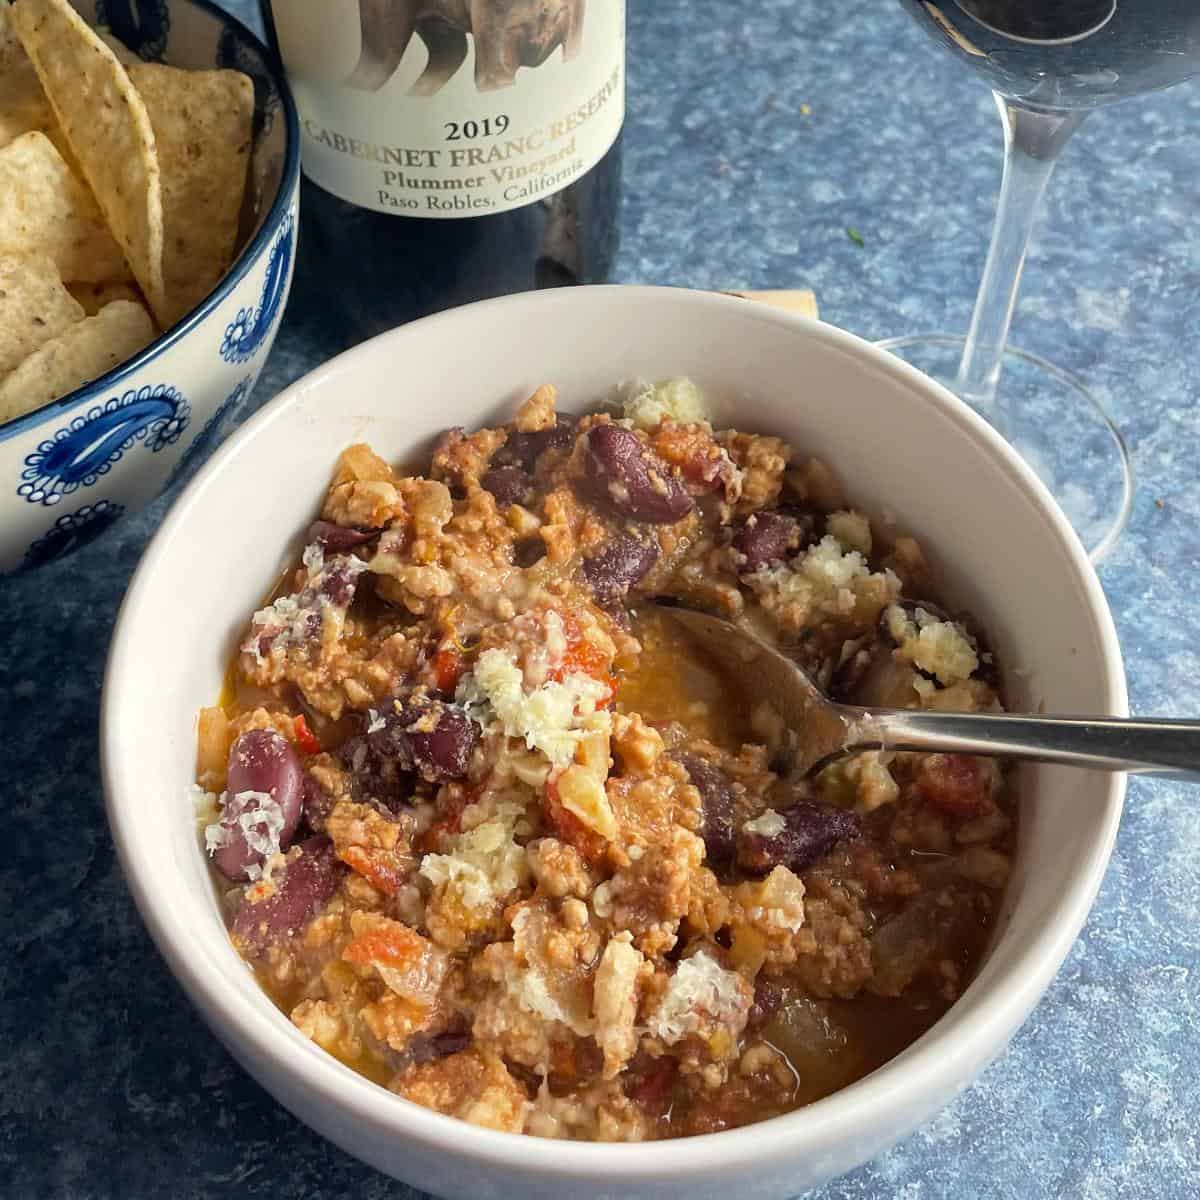 white bowl with turkey chili made with Hatch chiles, served with a red wine.